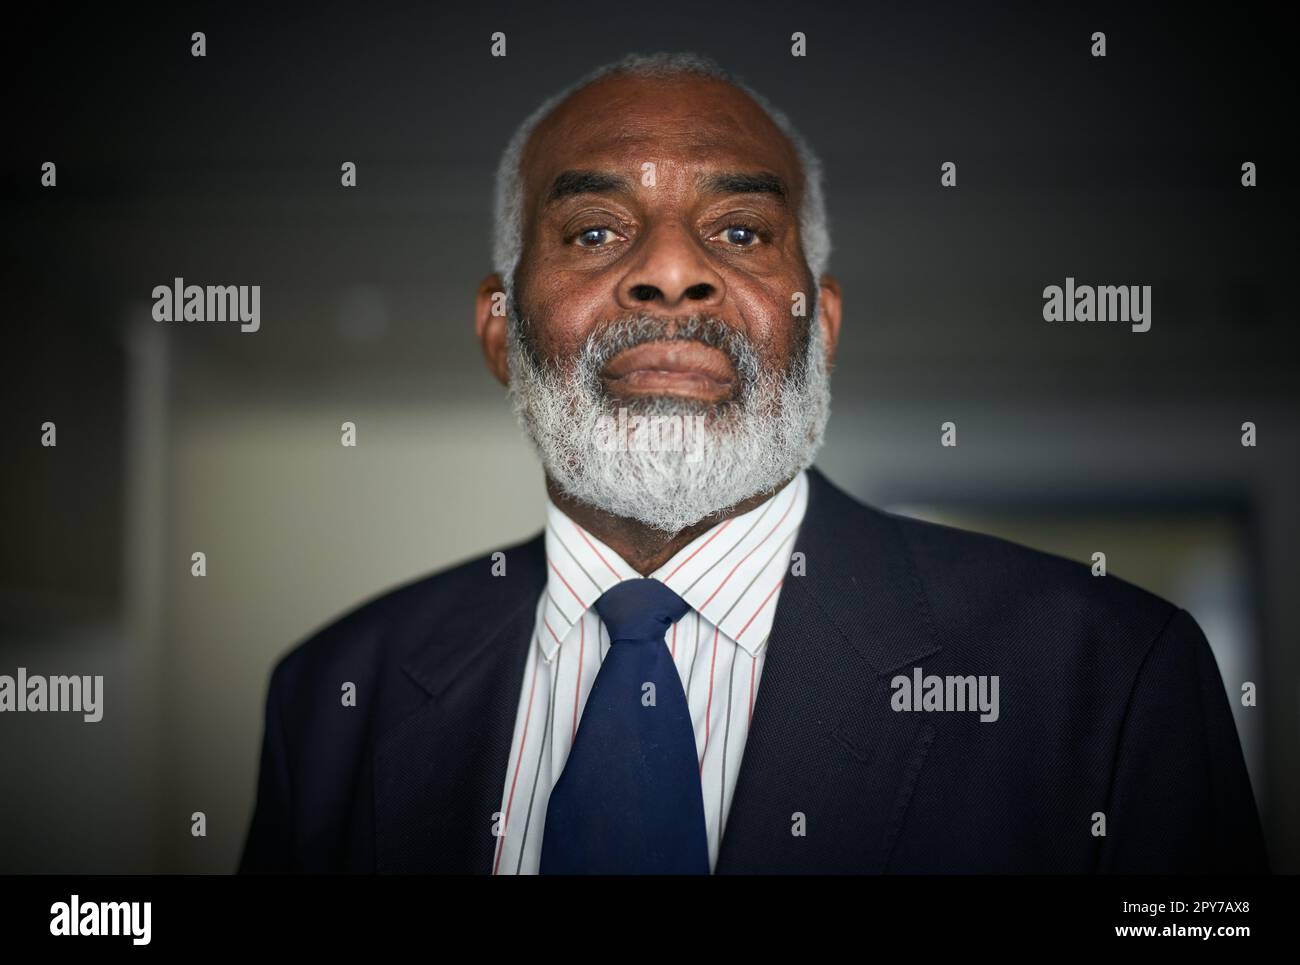 Portrait of Dr Neville Lawrence ahead of the 30th anniversary of his son's murder, Ministry of Justice,102 Petty France, London, England, UK. Stock Photo